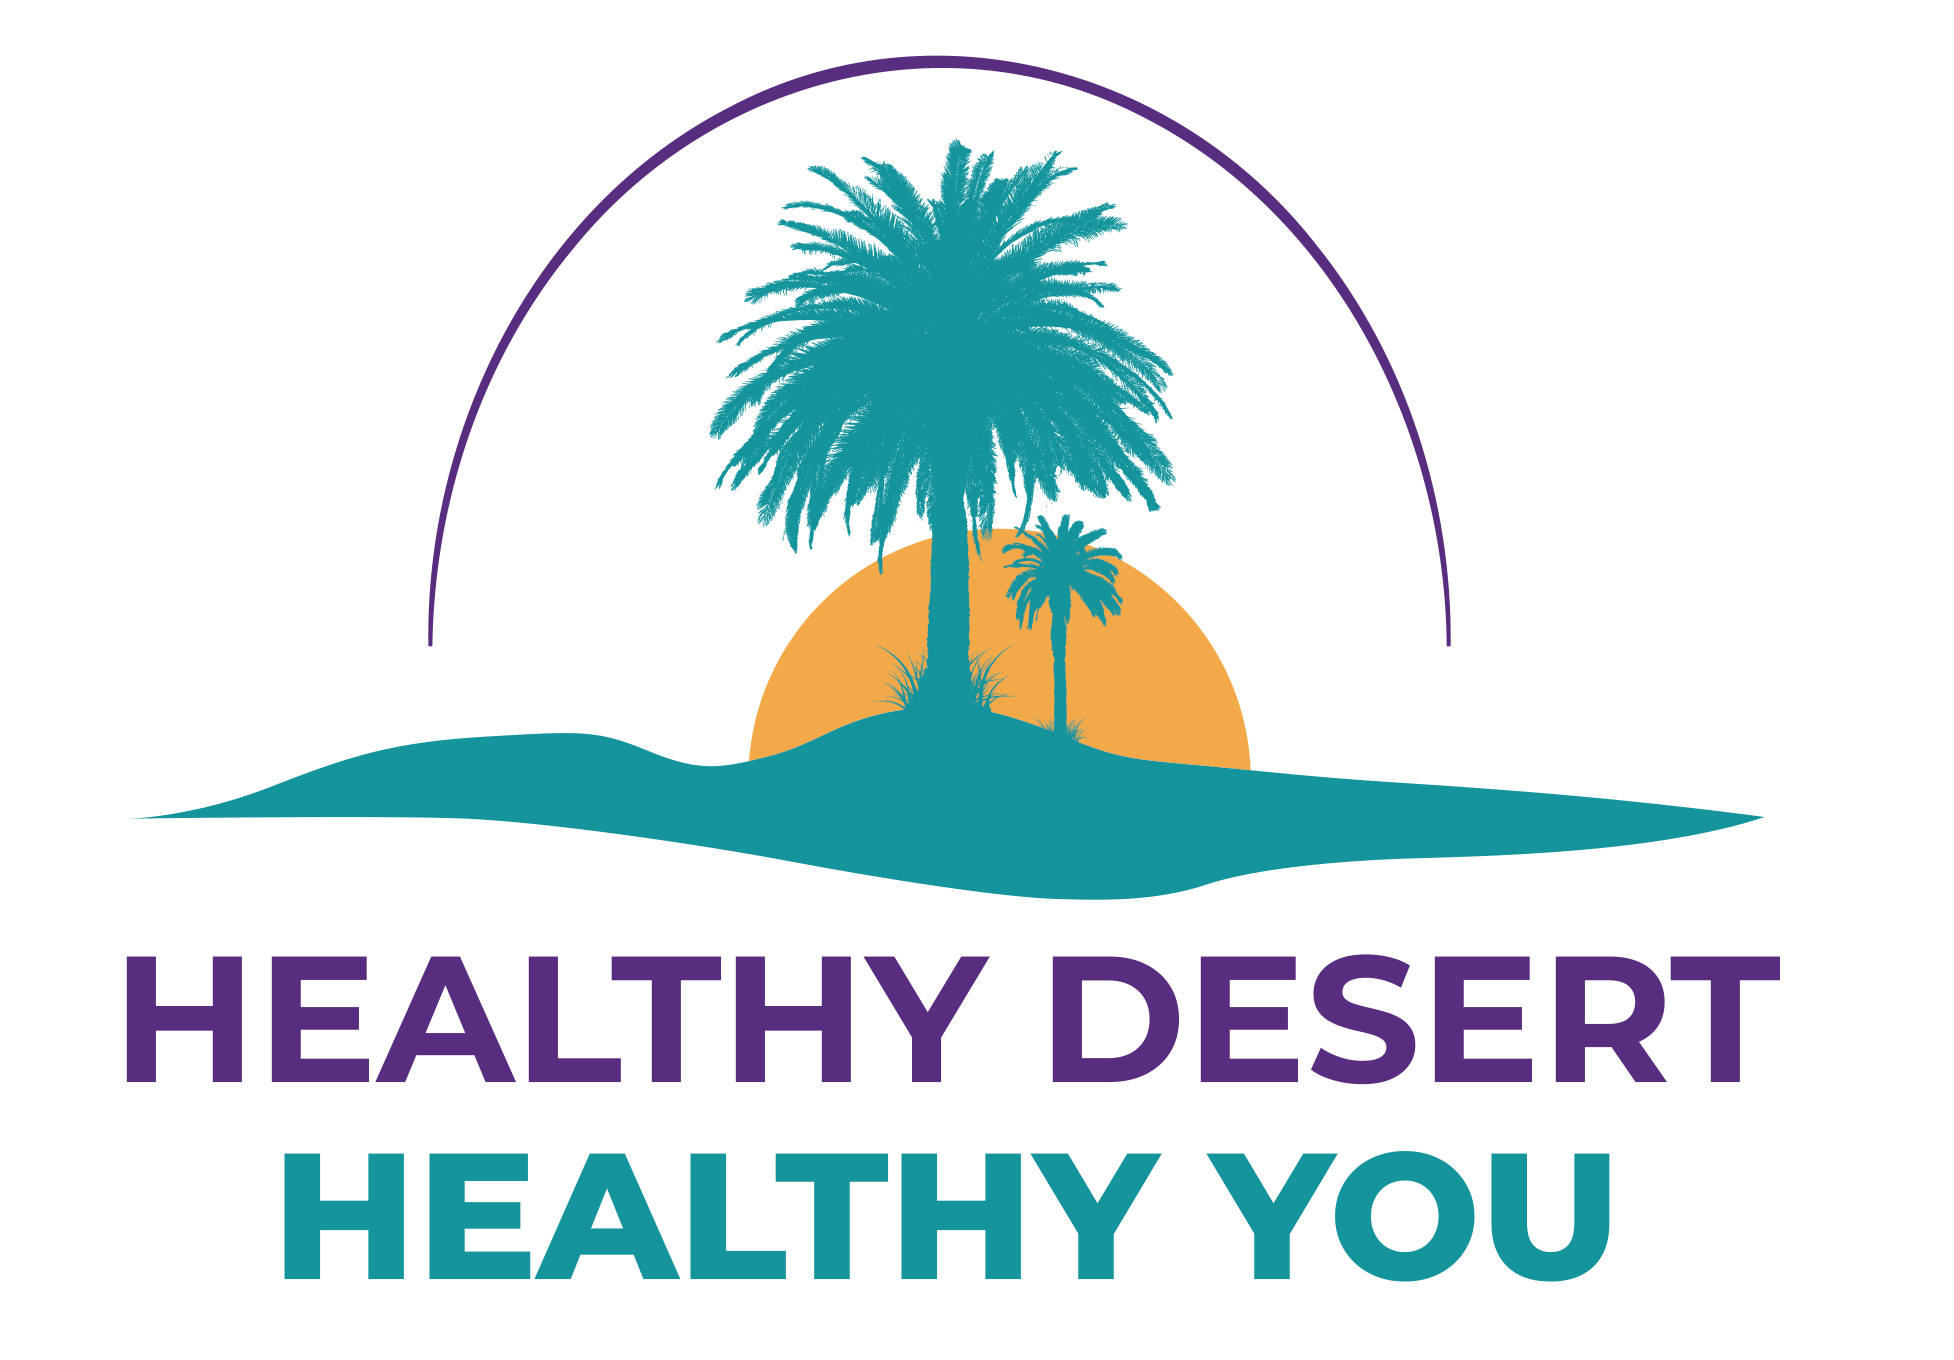 Healthy Desert, Healthy You logo includes event name.